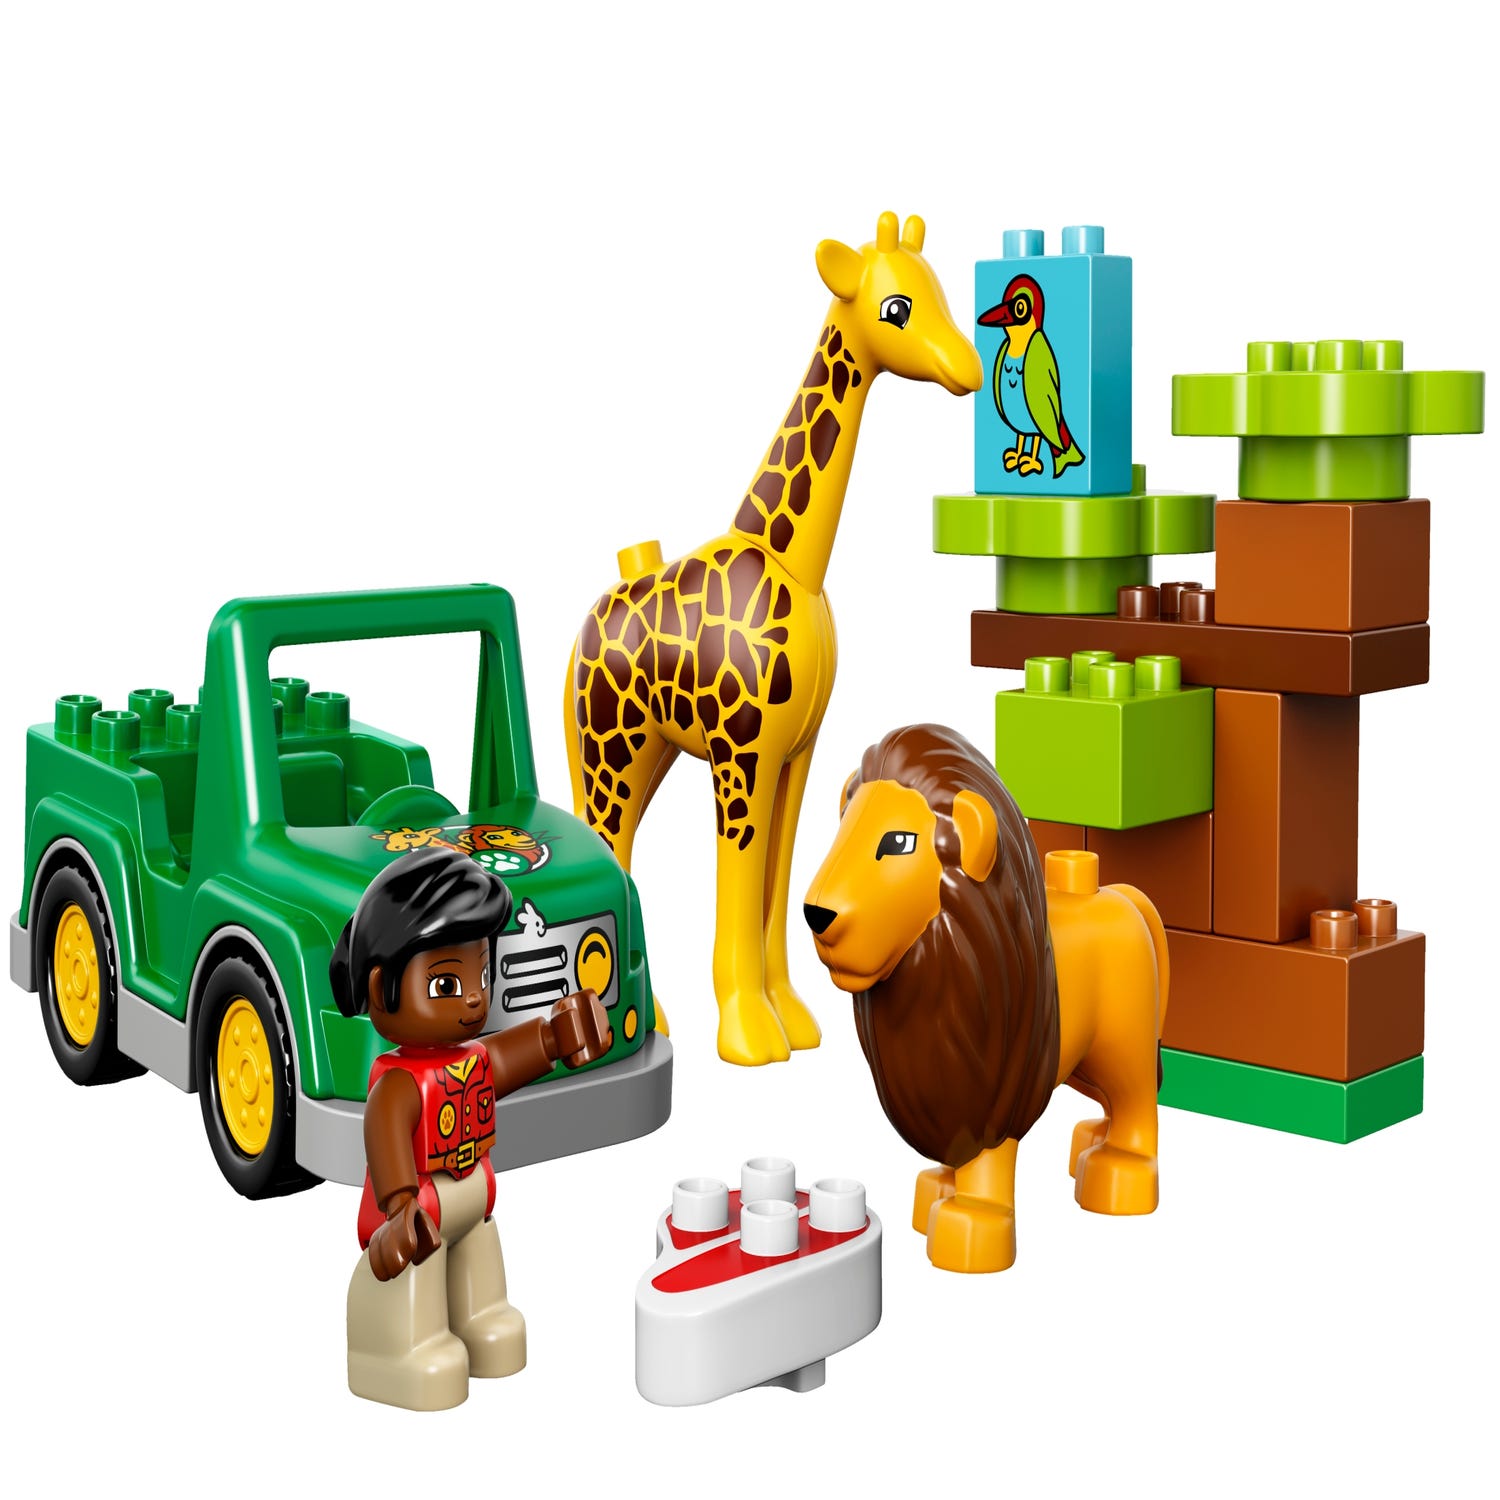 Savanna 10802 | DUPLO® | Buy online at the Official LEGO® US